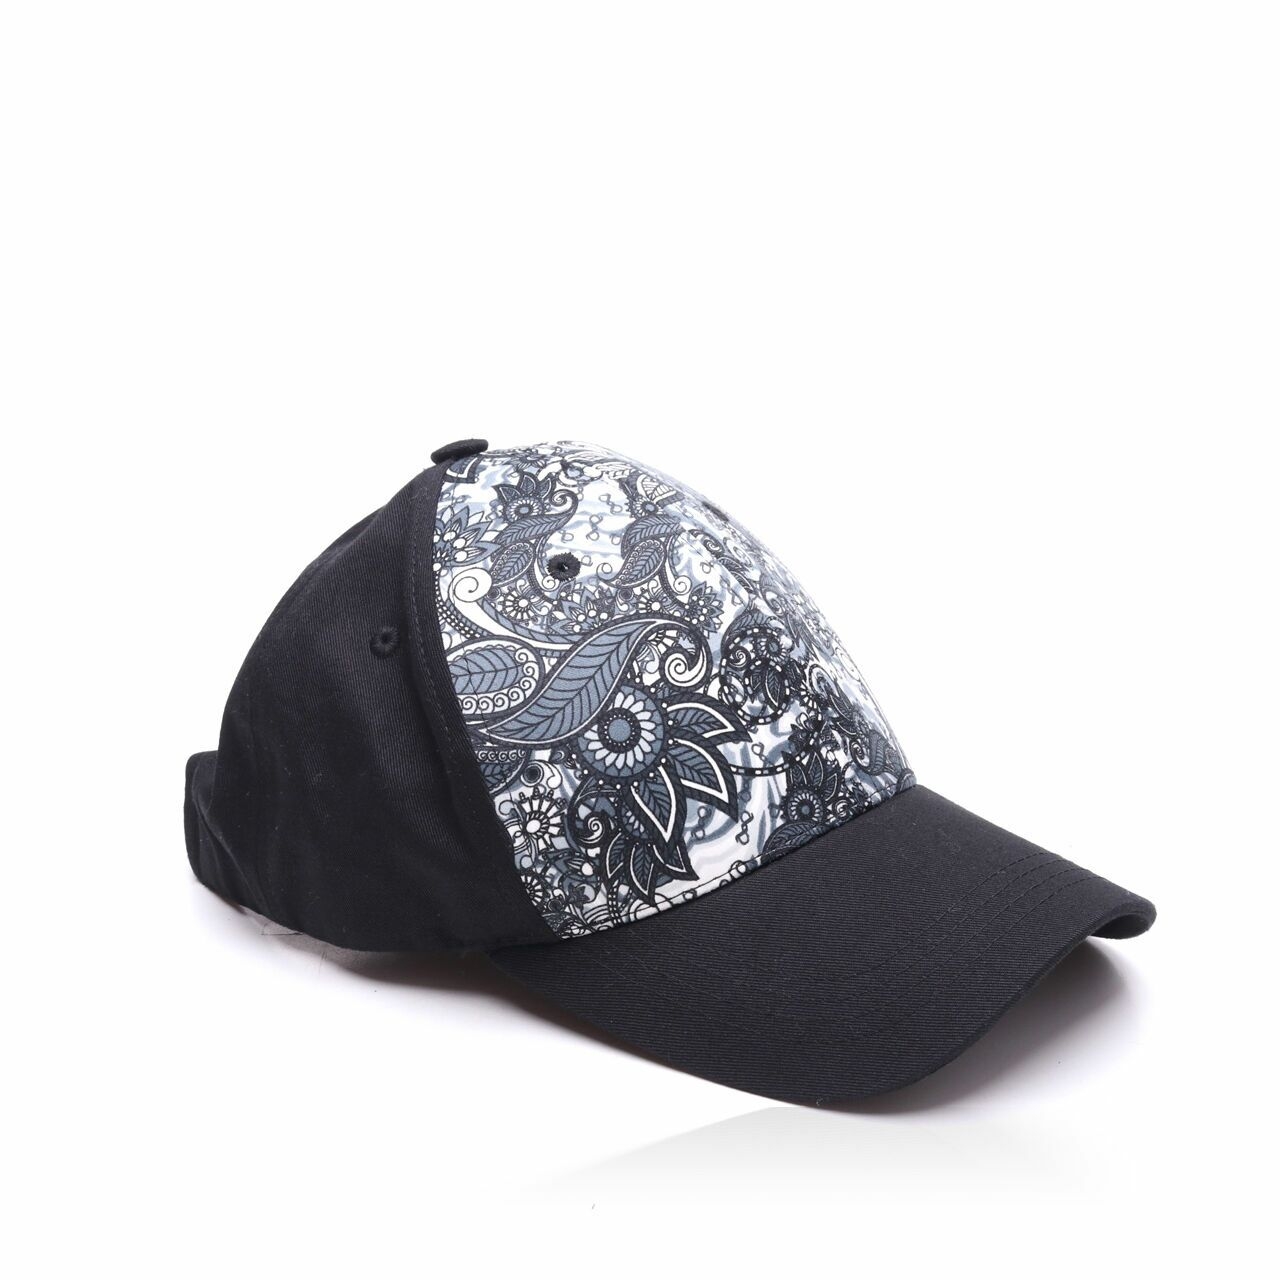 Private Collection Black Patterned Hats